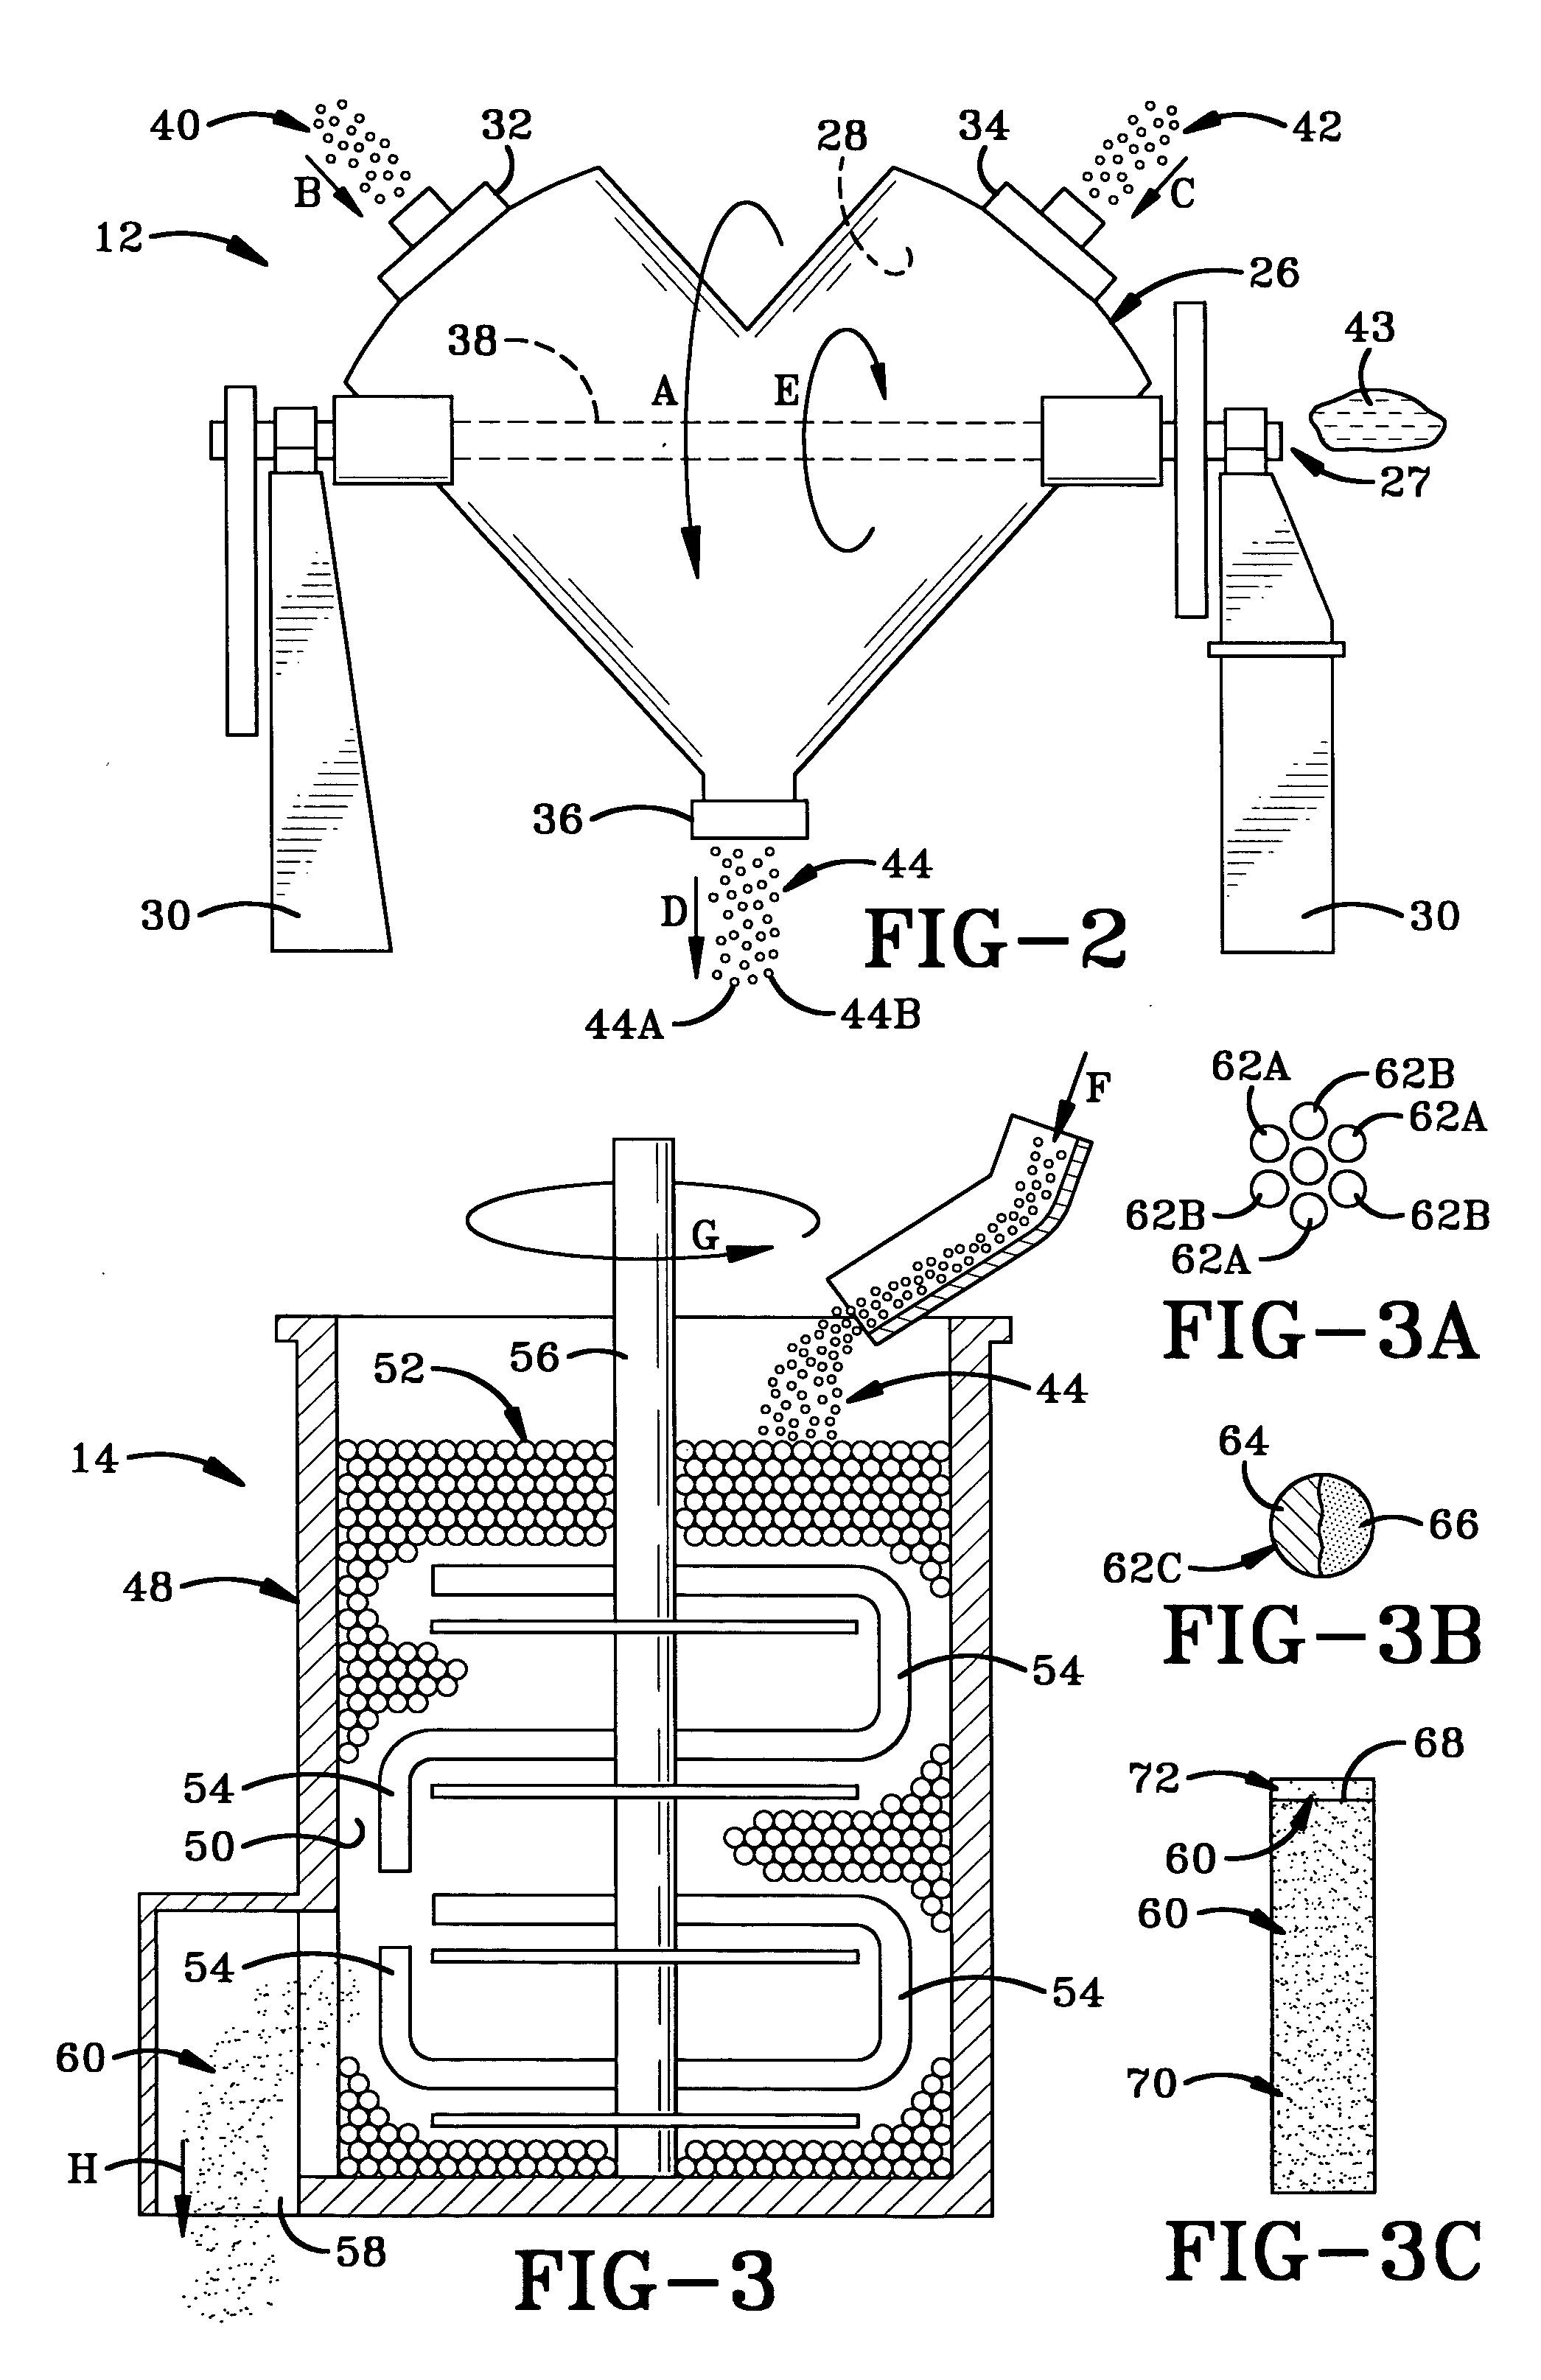 Compositions for use in stored crop treatment aerosols and method and apparatus for application to stored crops